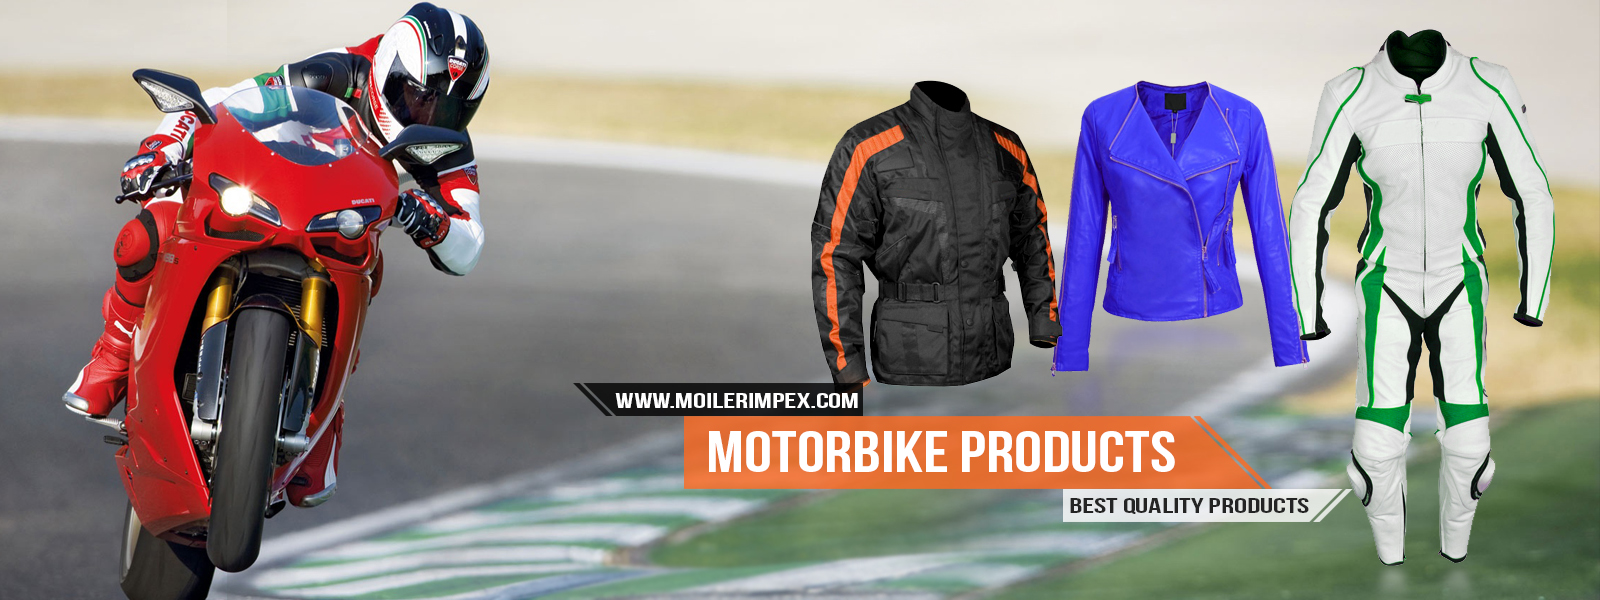 Motorbike Products